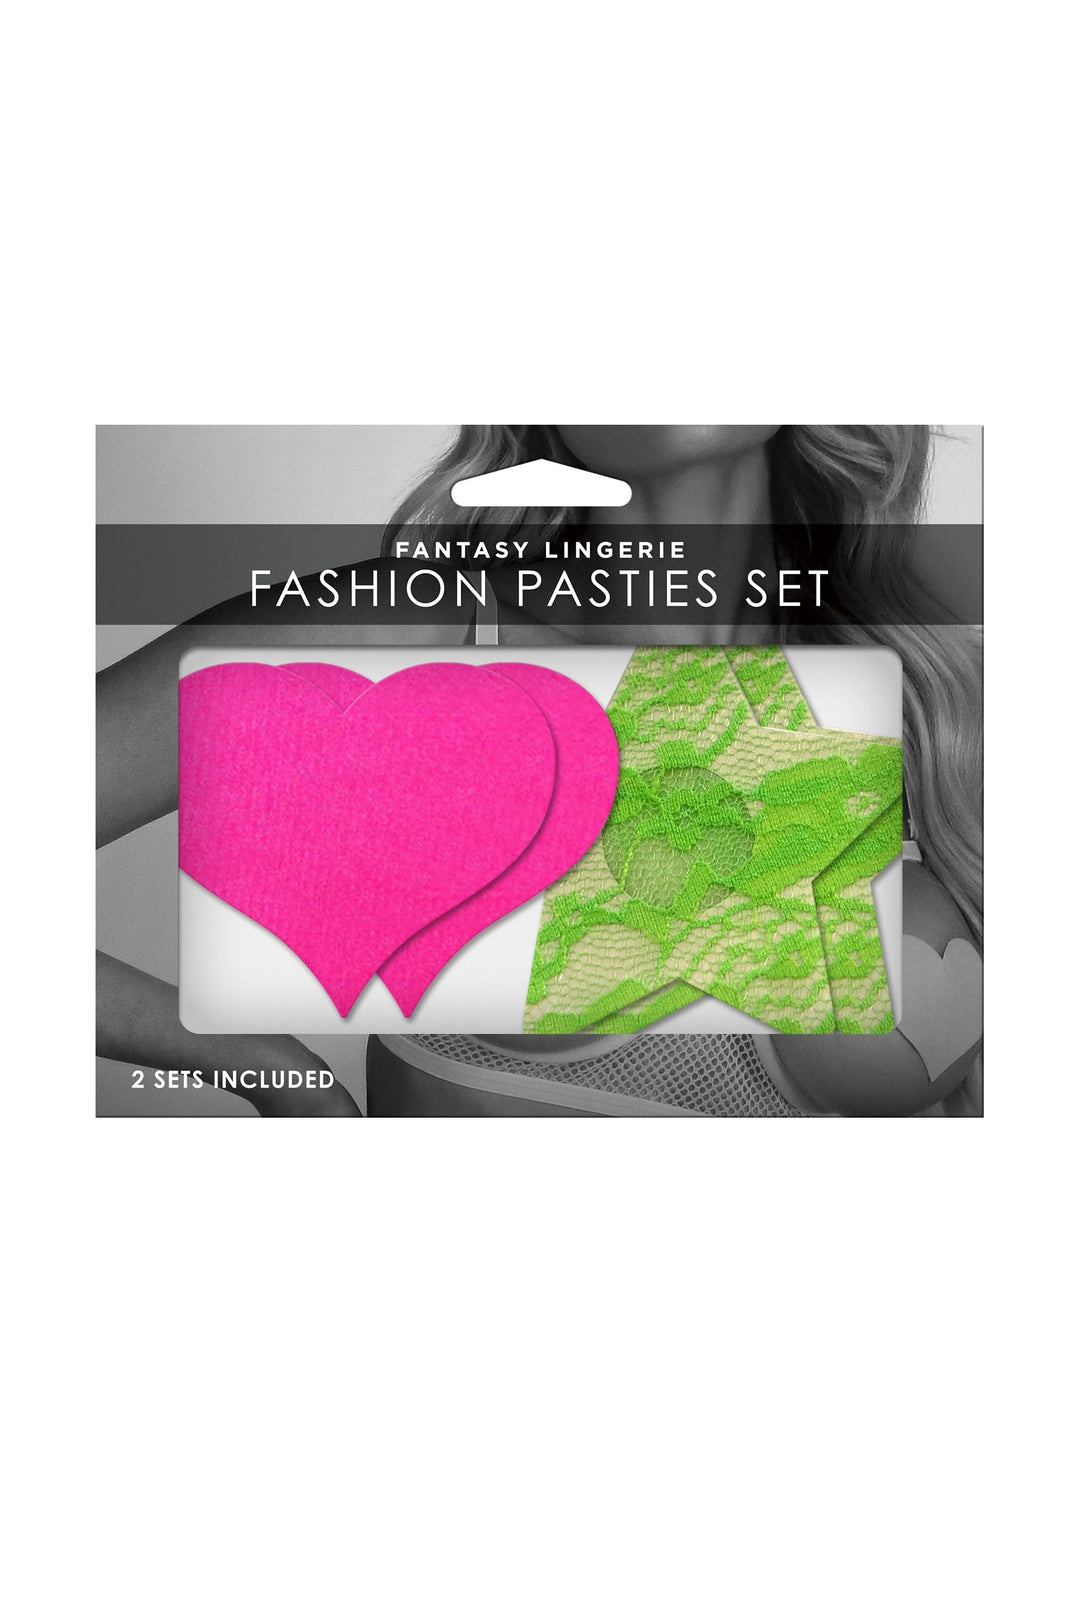 UV Reactive Neon Heart & Lace Star Pasties Pink & Green Pack of 2-Fantasy Lingerie-Rebel Romance